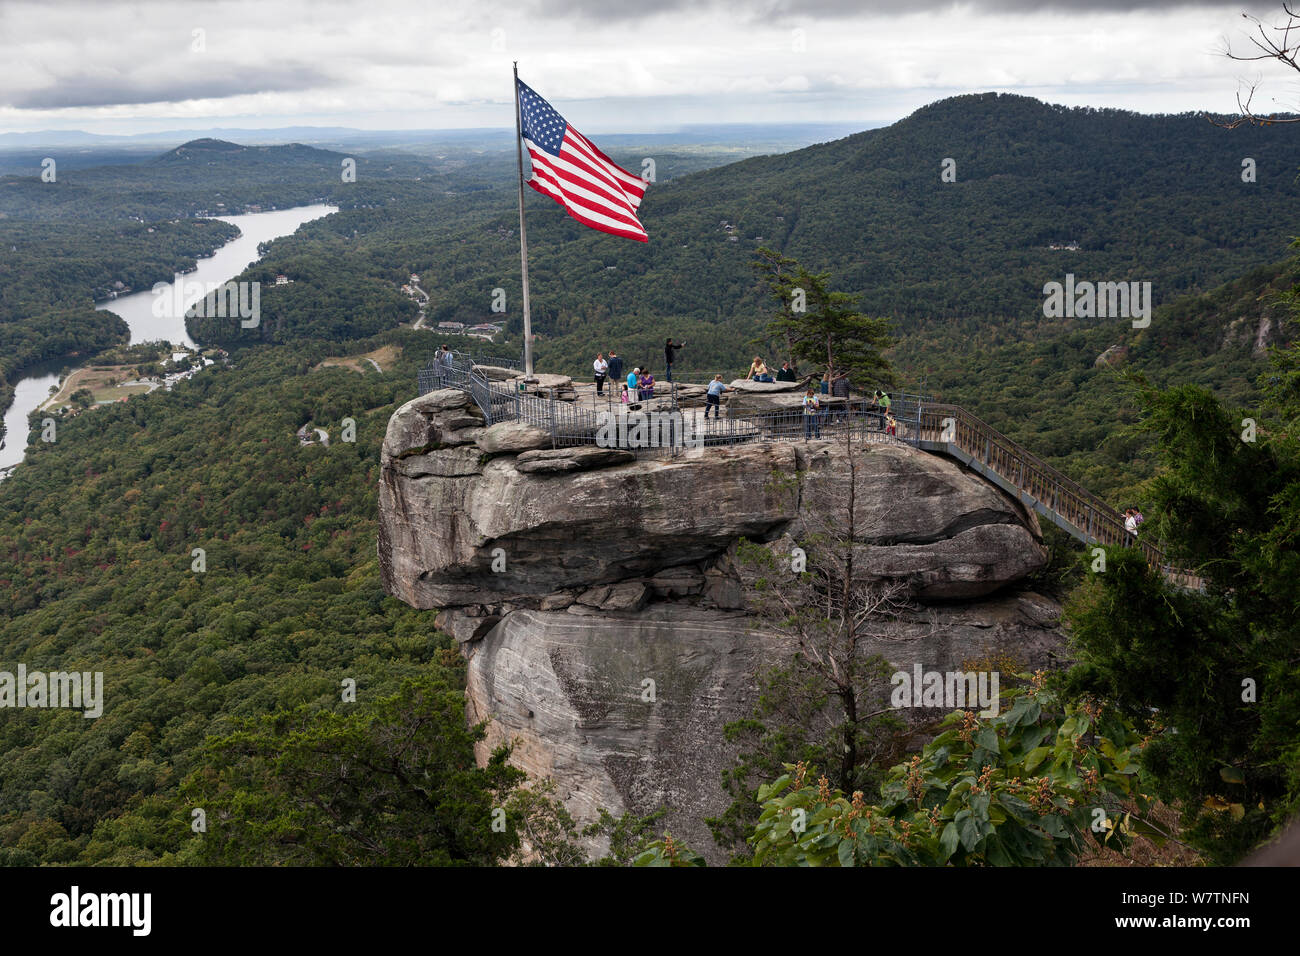 American Stars and stripes flag on top of Chimney Rock in Chimney Rock State Park. North Carolina, USA, October 2013. Stock Photo